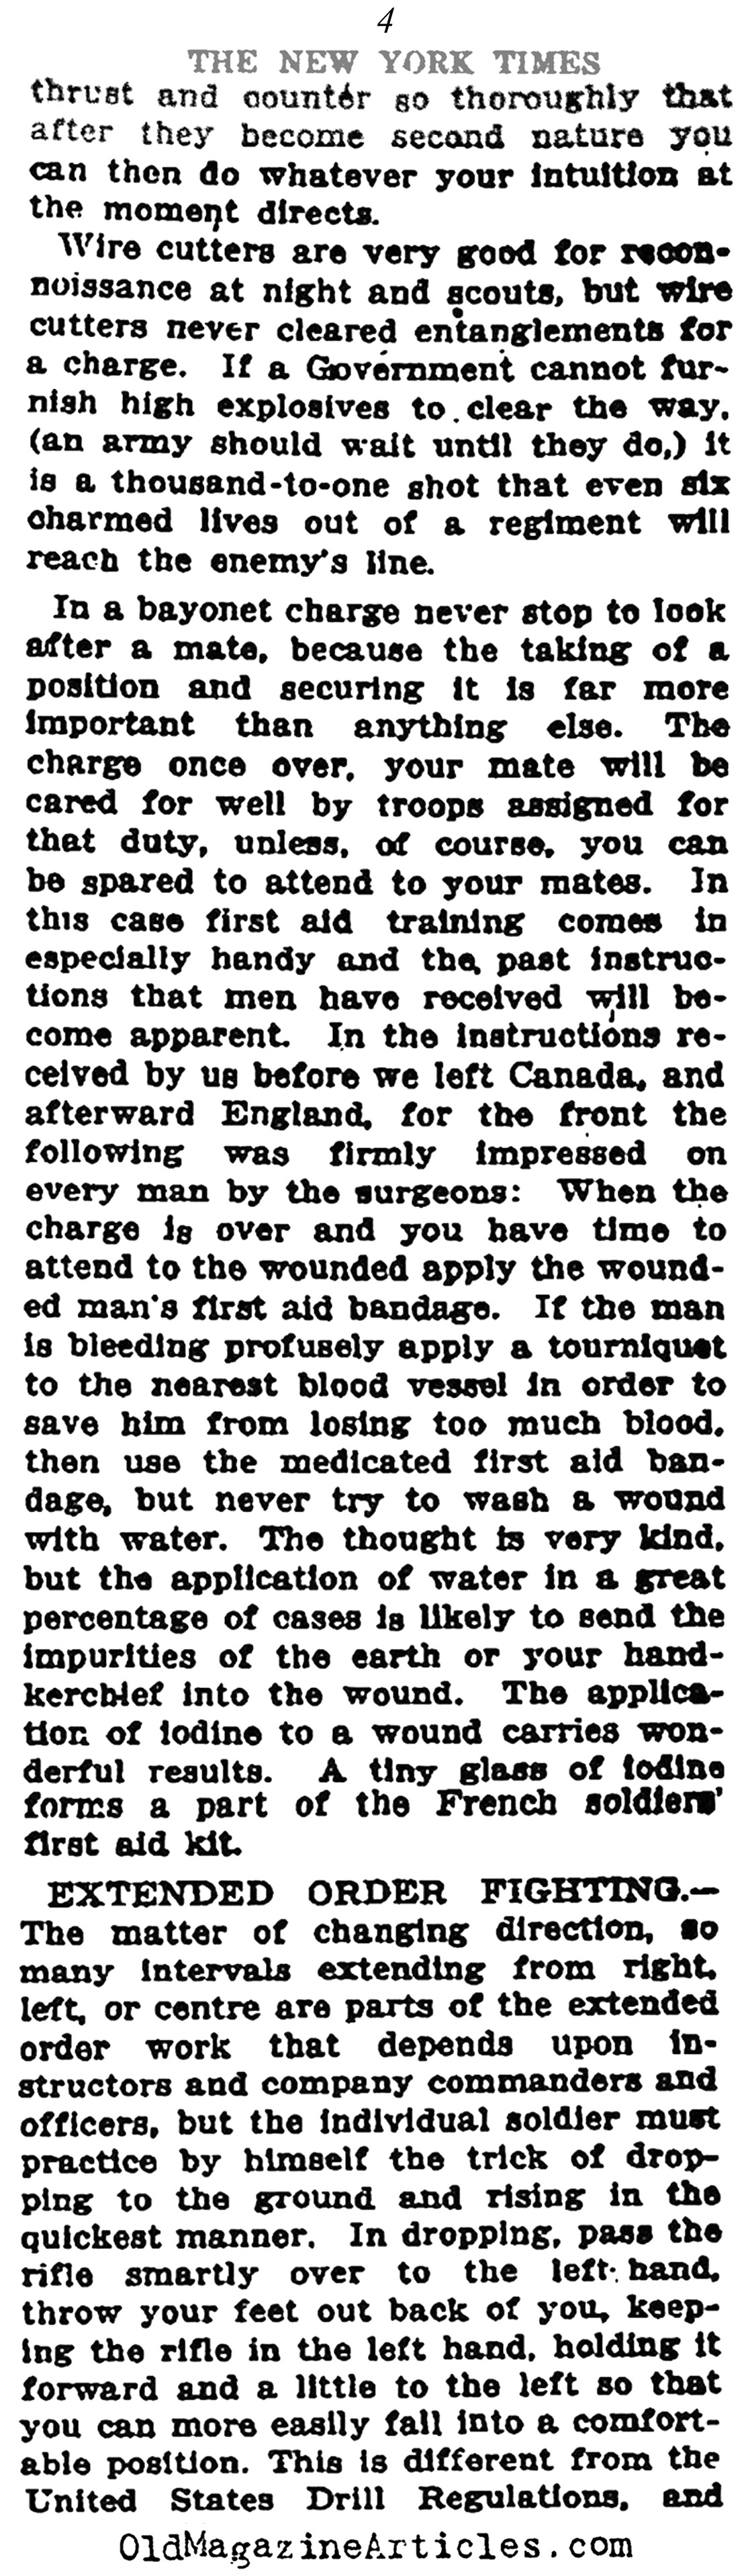 Letter from a Veteran (NY Times, 1916)